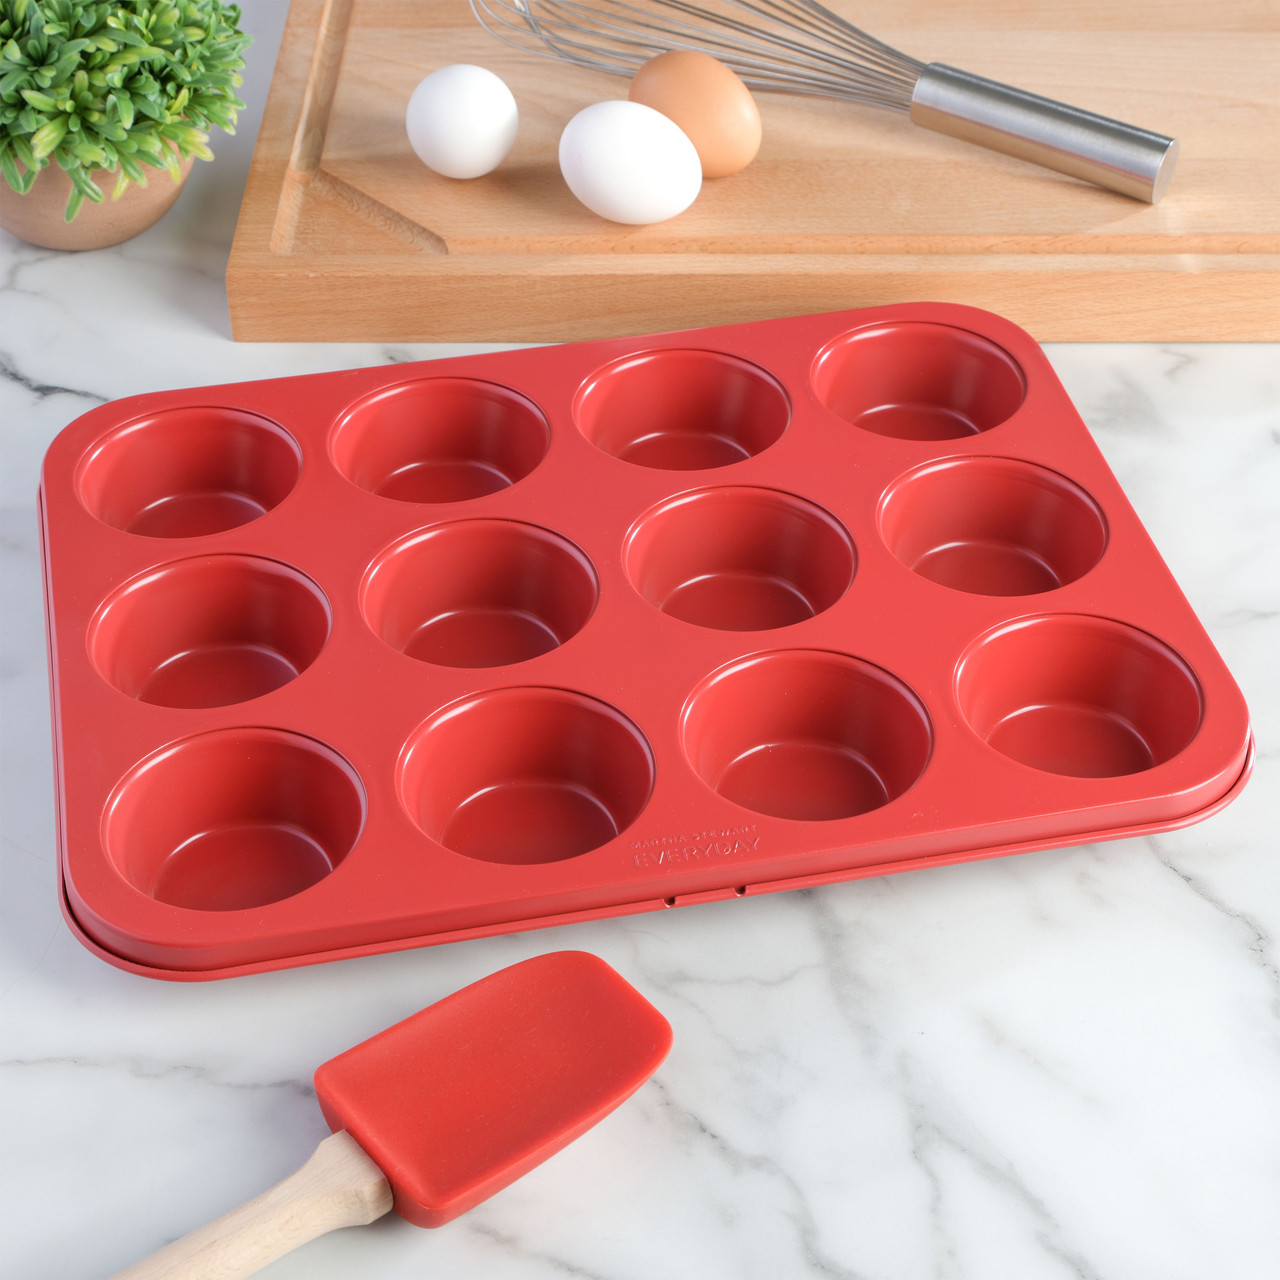 Martha Stewart Everyday 9 in. Nonstick Carbon Steel Loaf Pan in Red